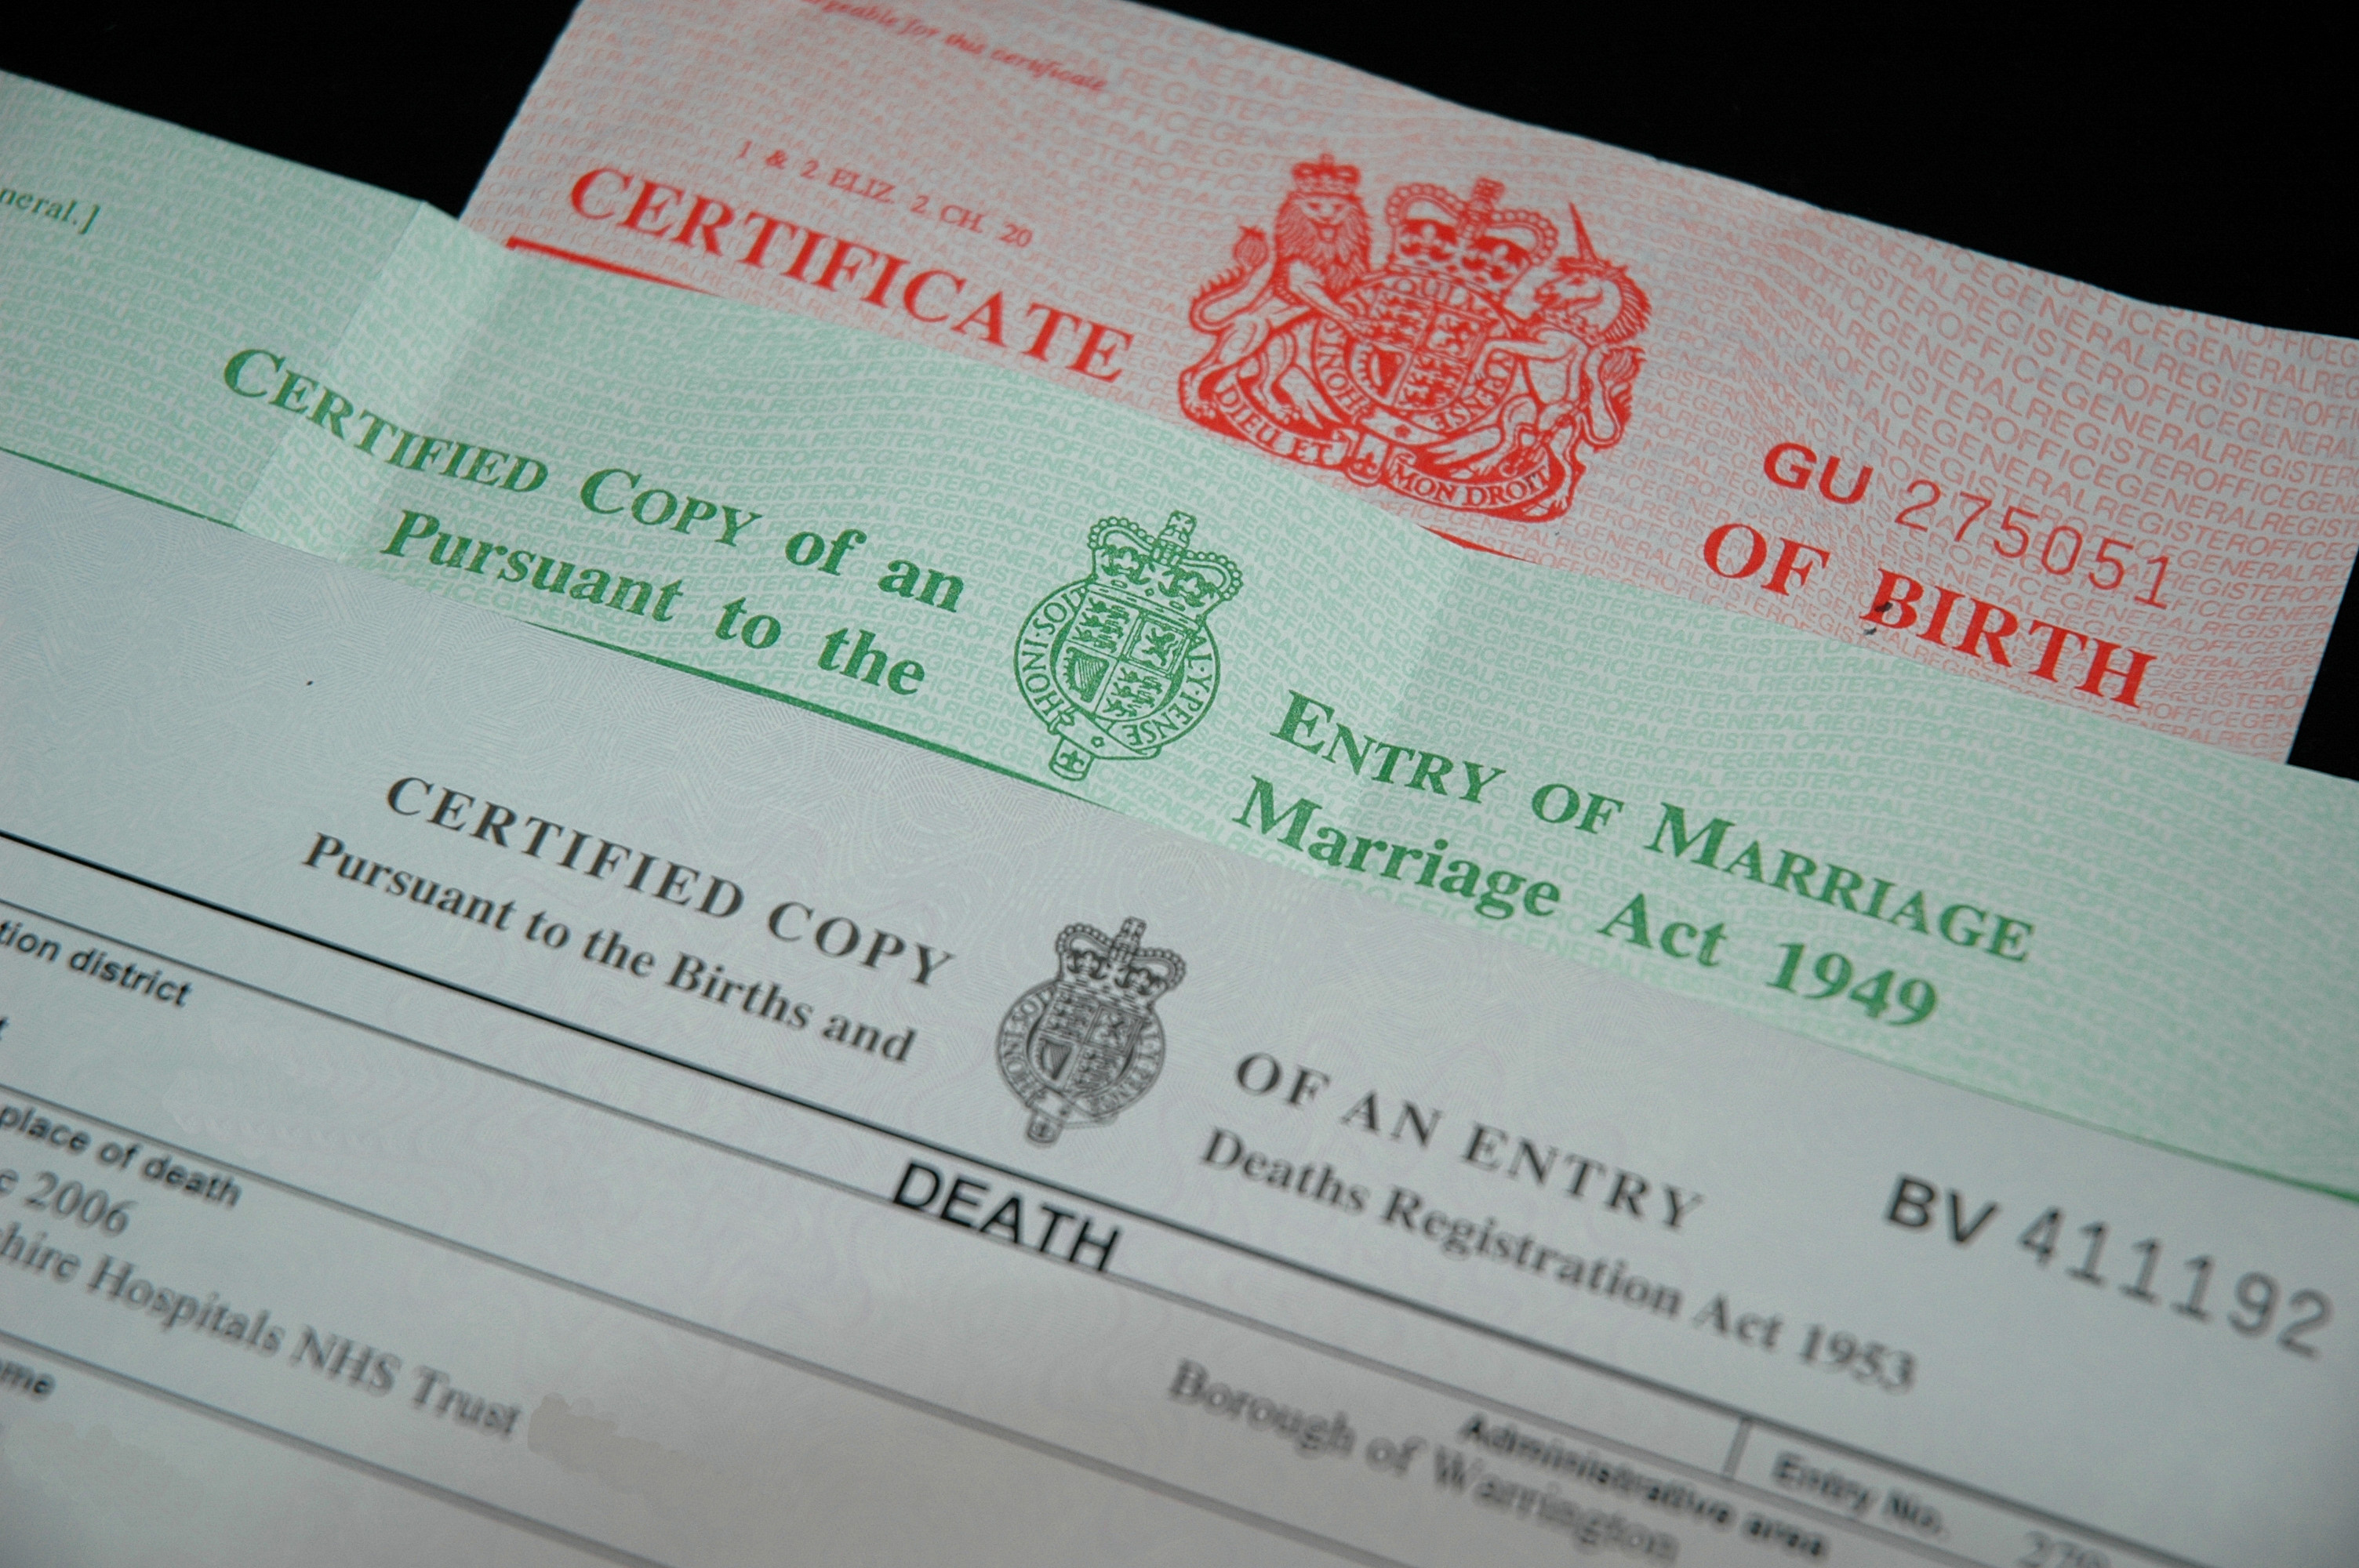 marriage, death and birth certificates